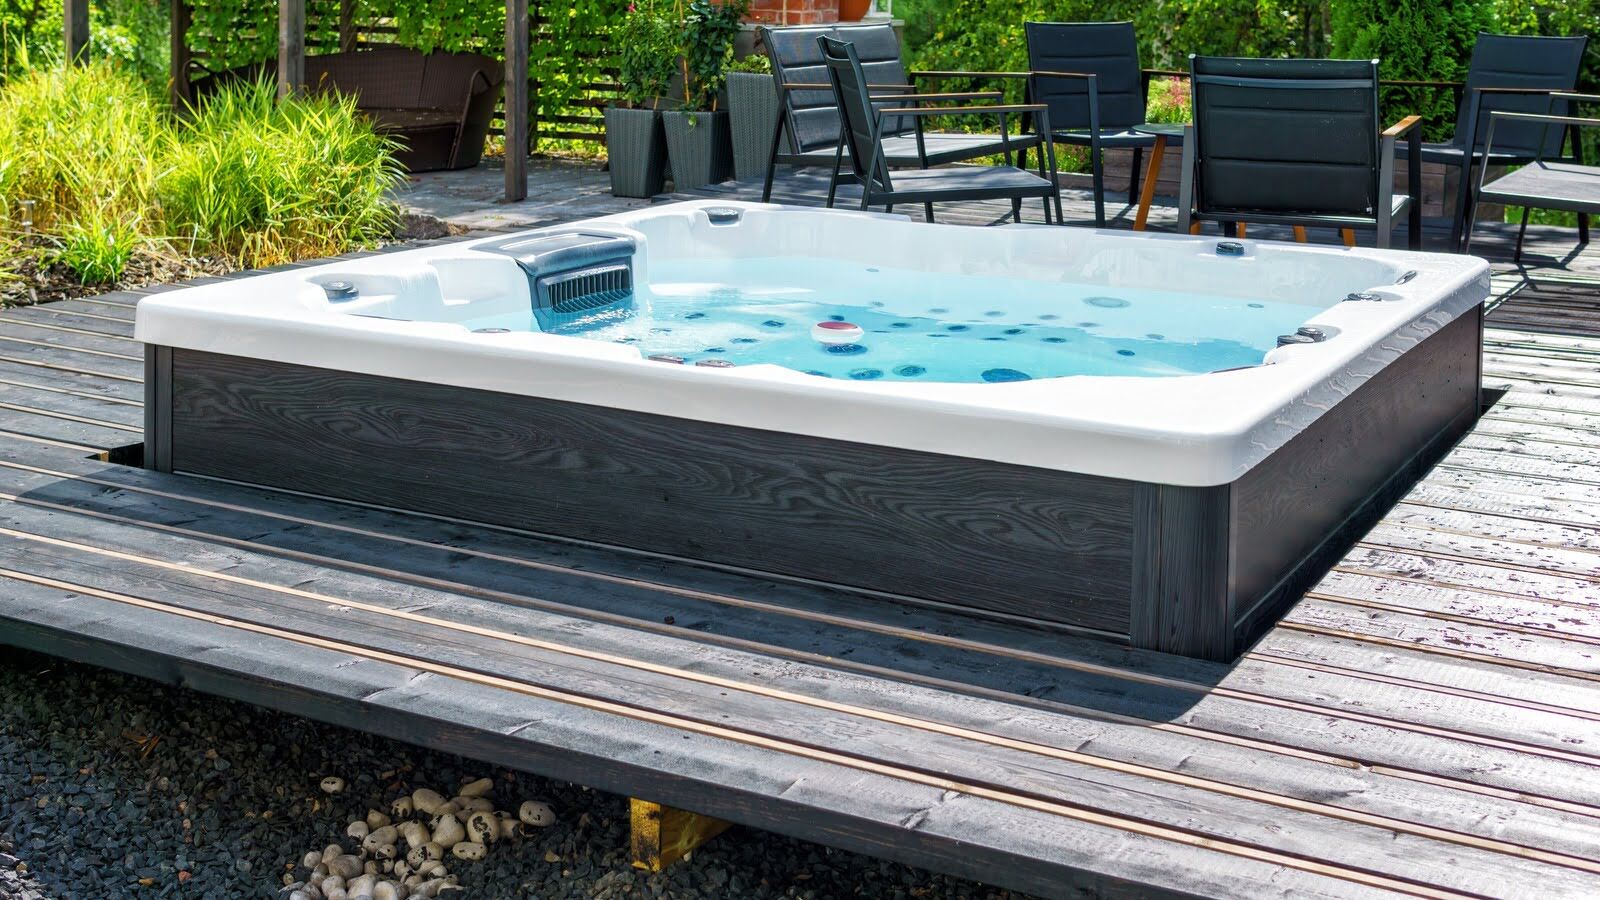 What Do You Need For A Hot Tub